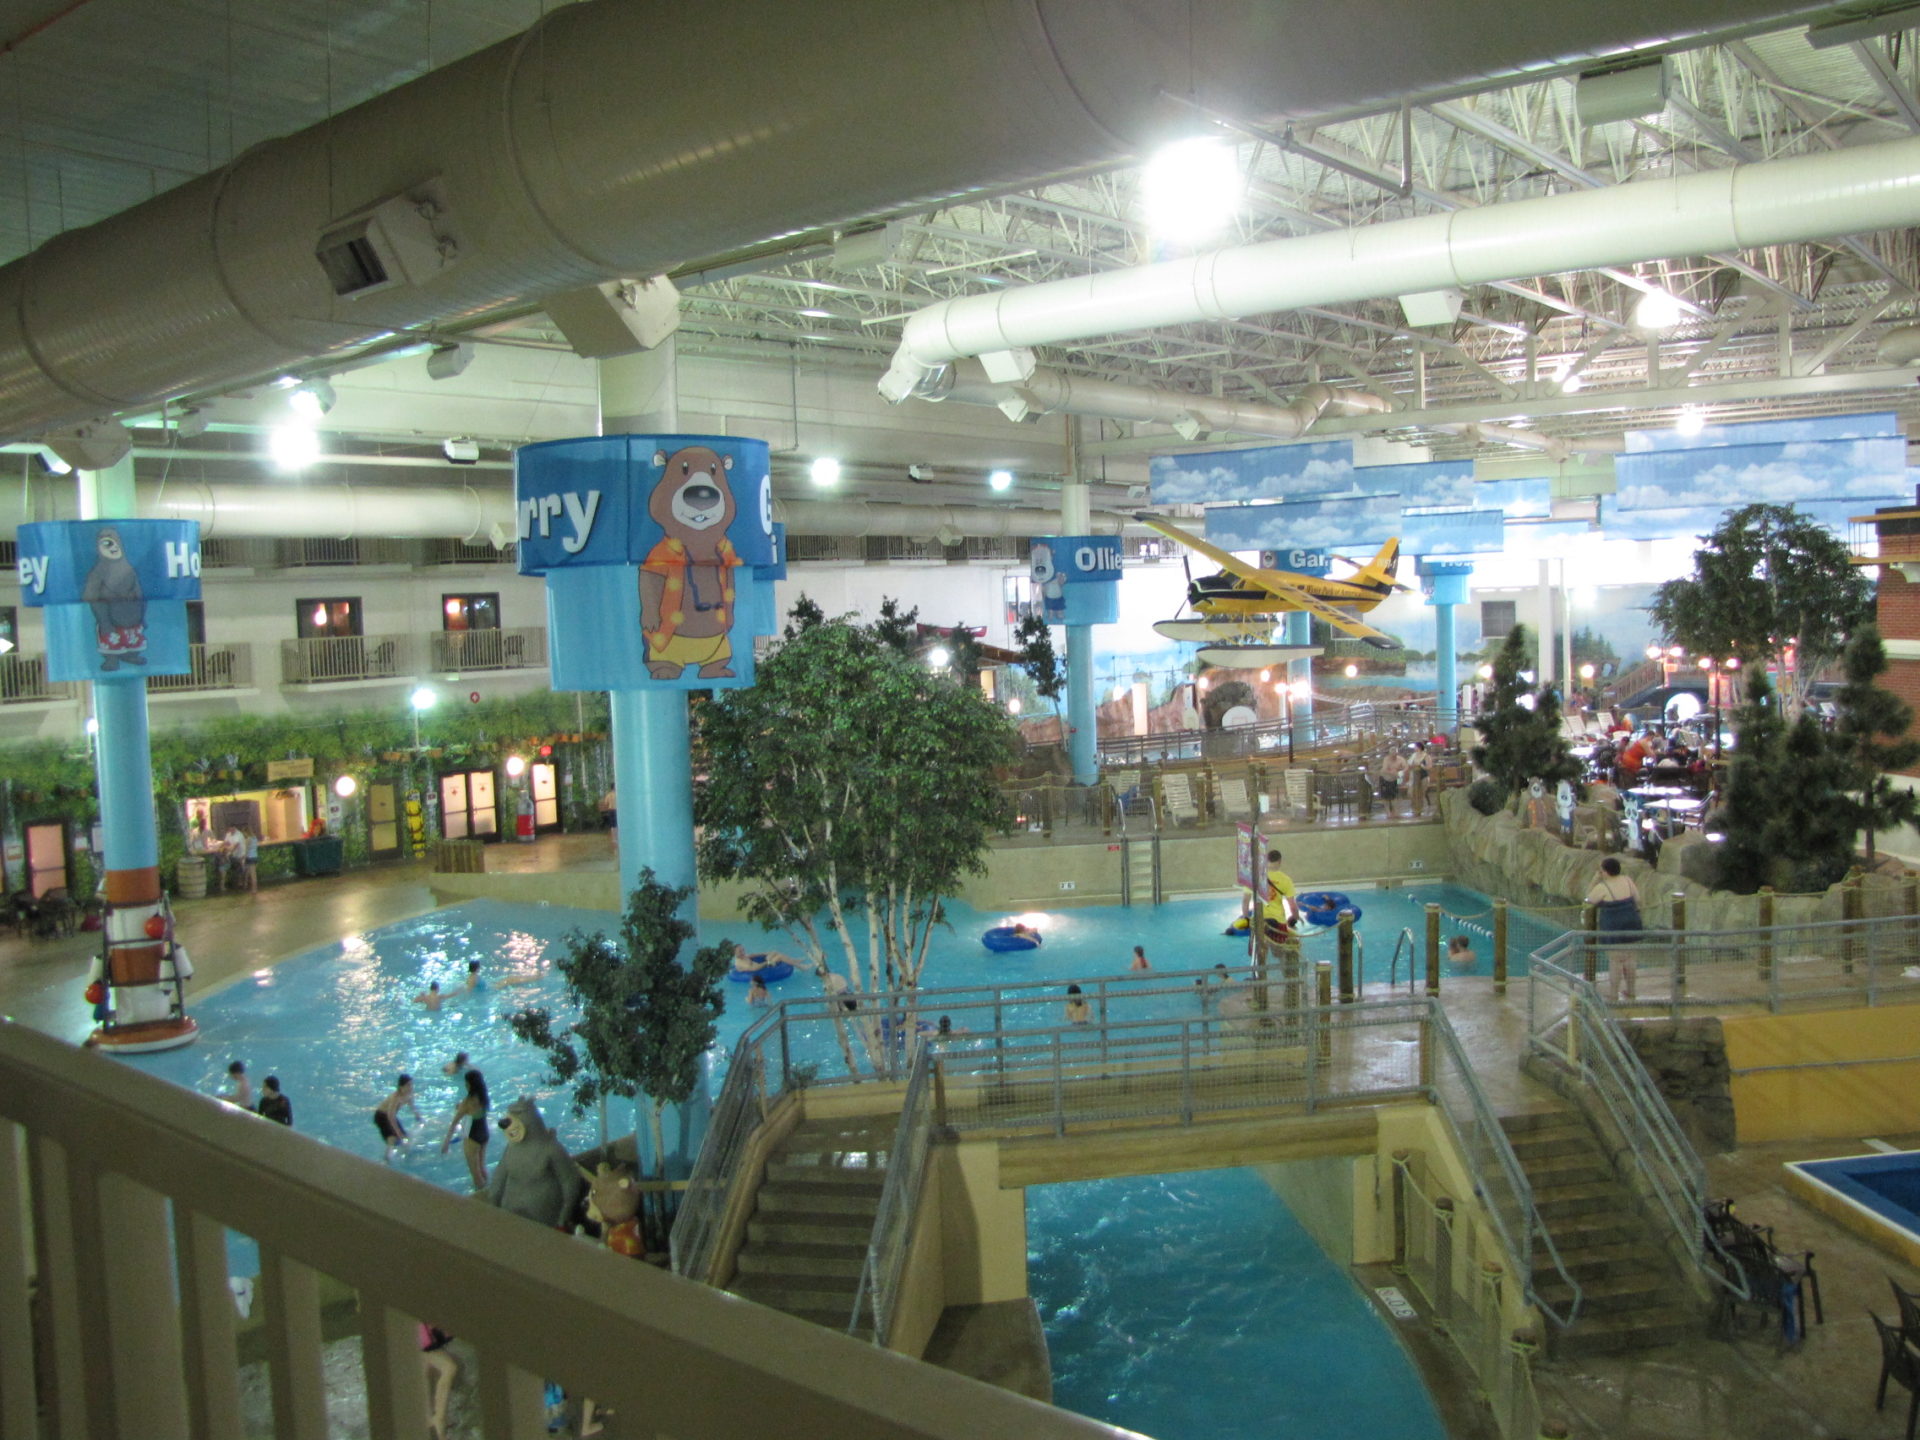 Of Kids and Waterparks